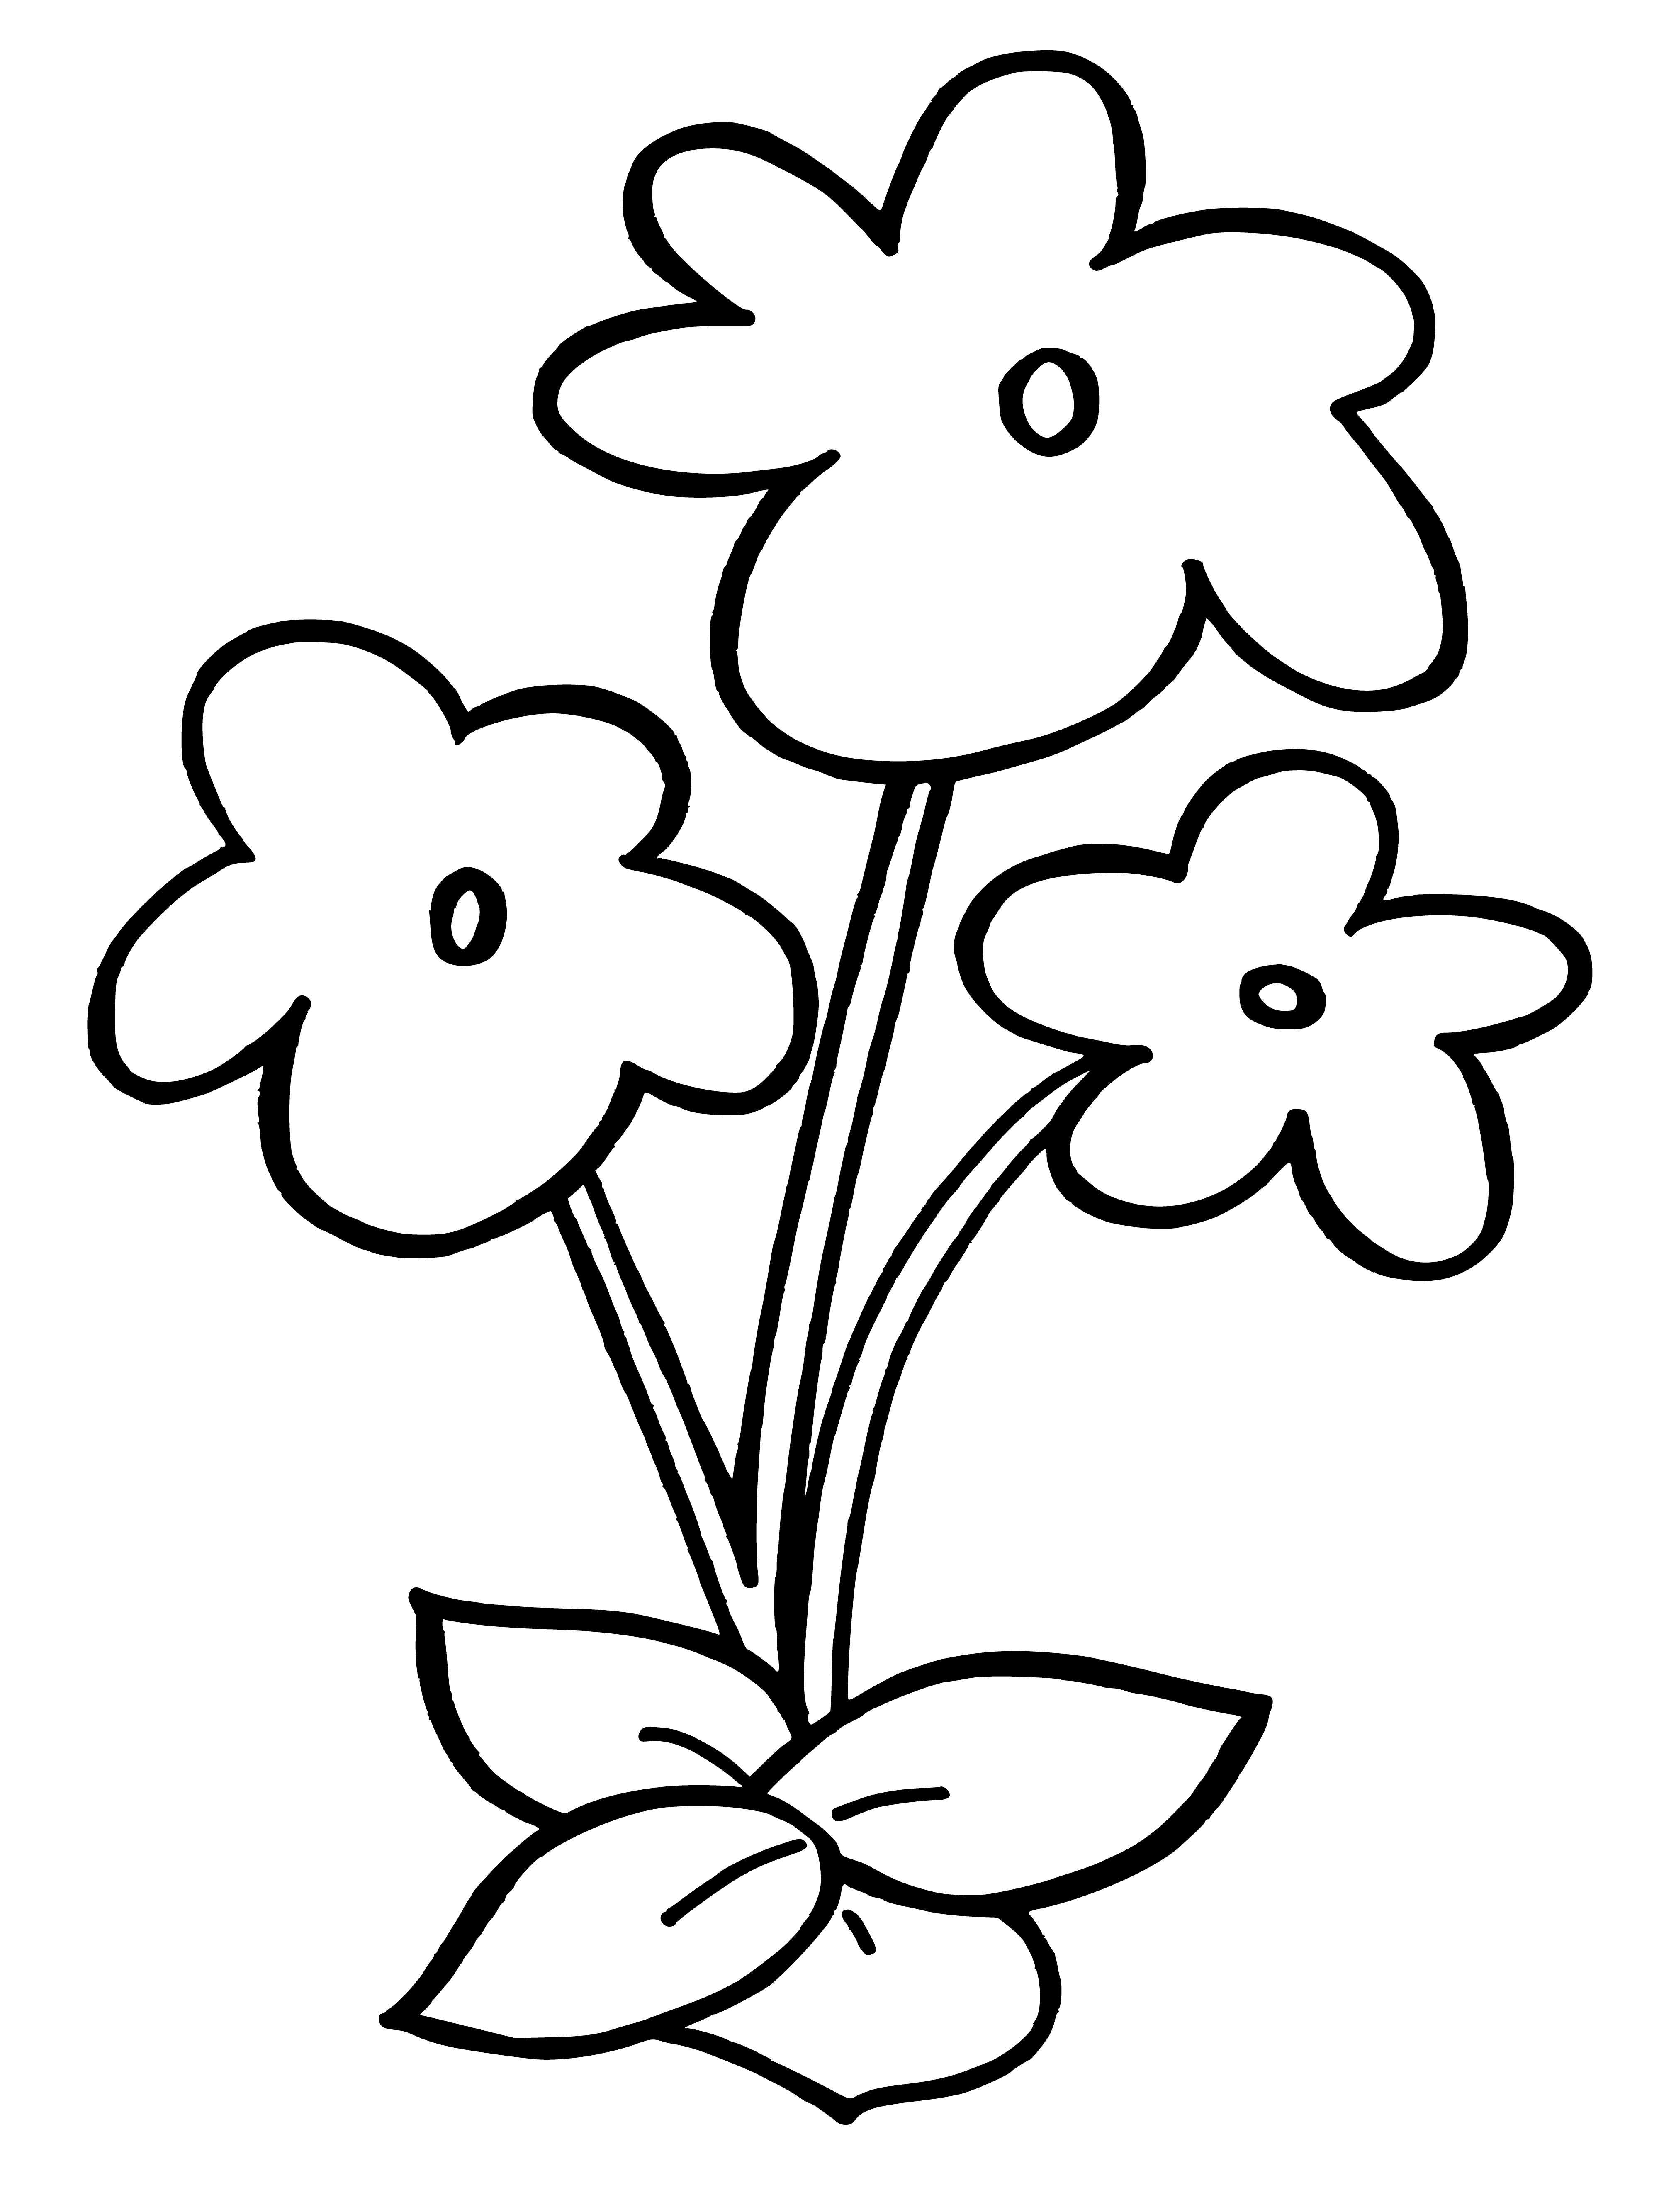 coloring page: Flowers blooming in coloring page with petals of various colors, stems, leaves and some with pollen.